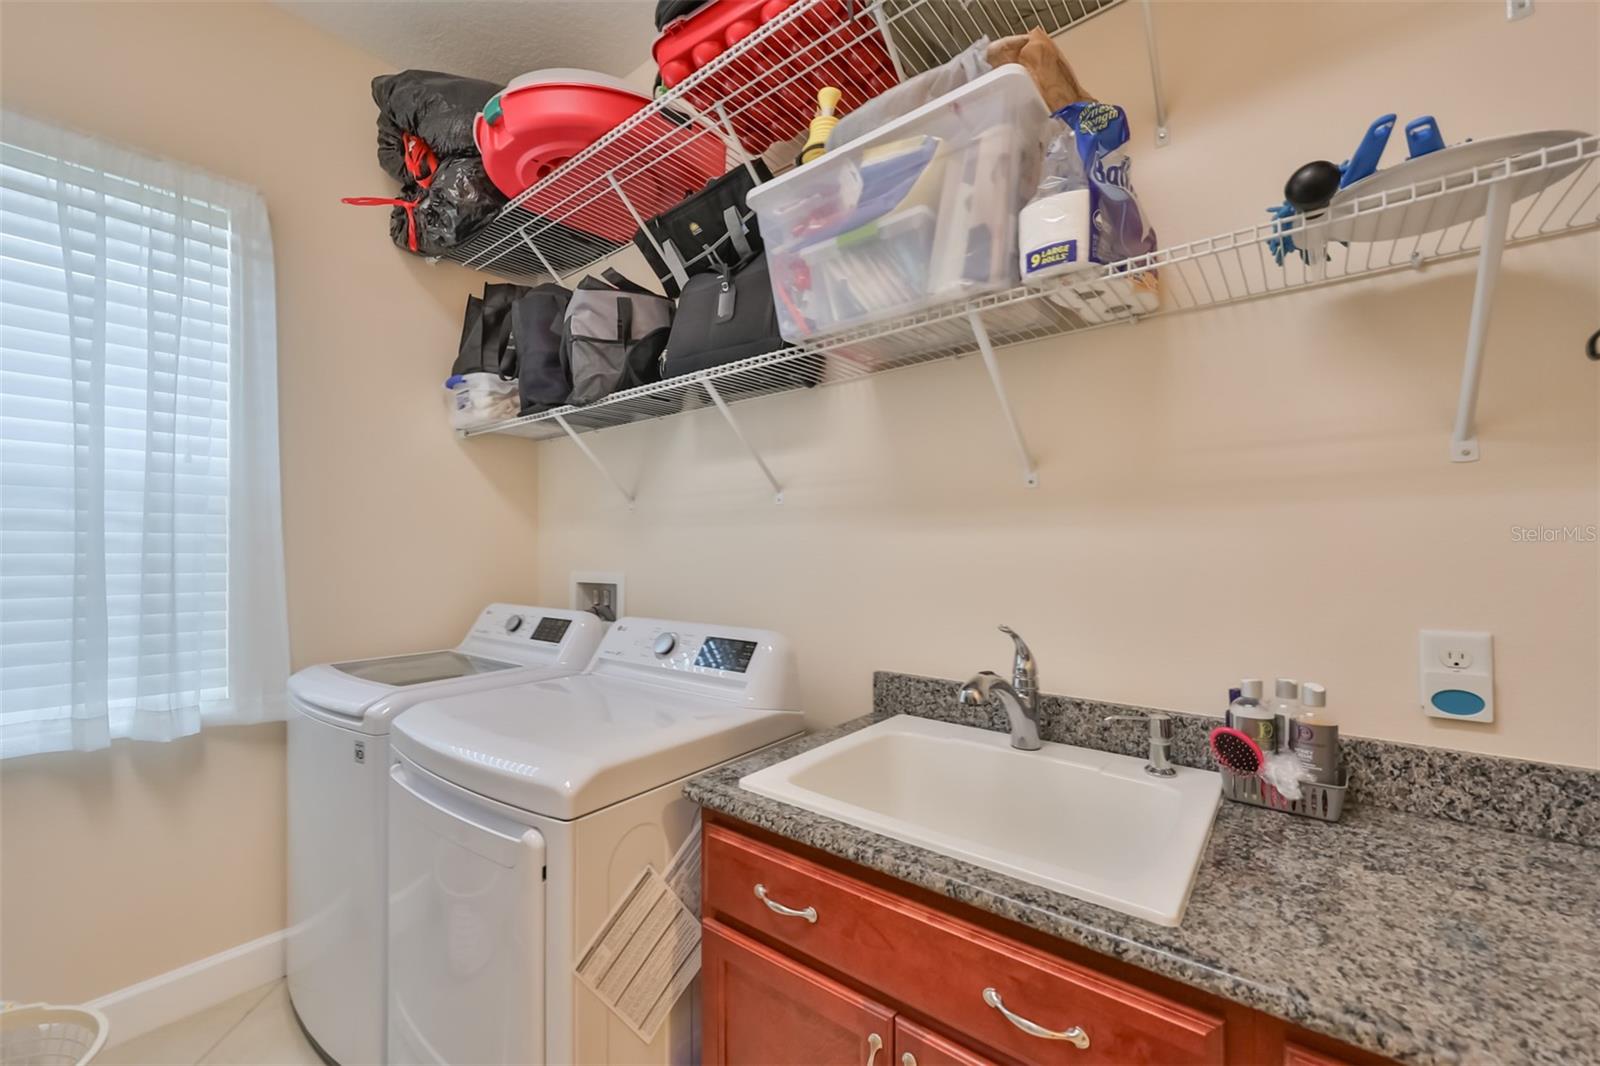 Laundry Room is indoors and perfect for year round weather concerns. Complete with storage, sink with granite countertop and cabinets. Washer and Dryer included.